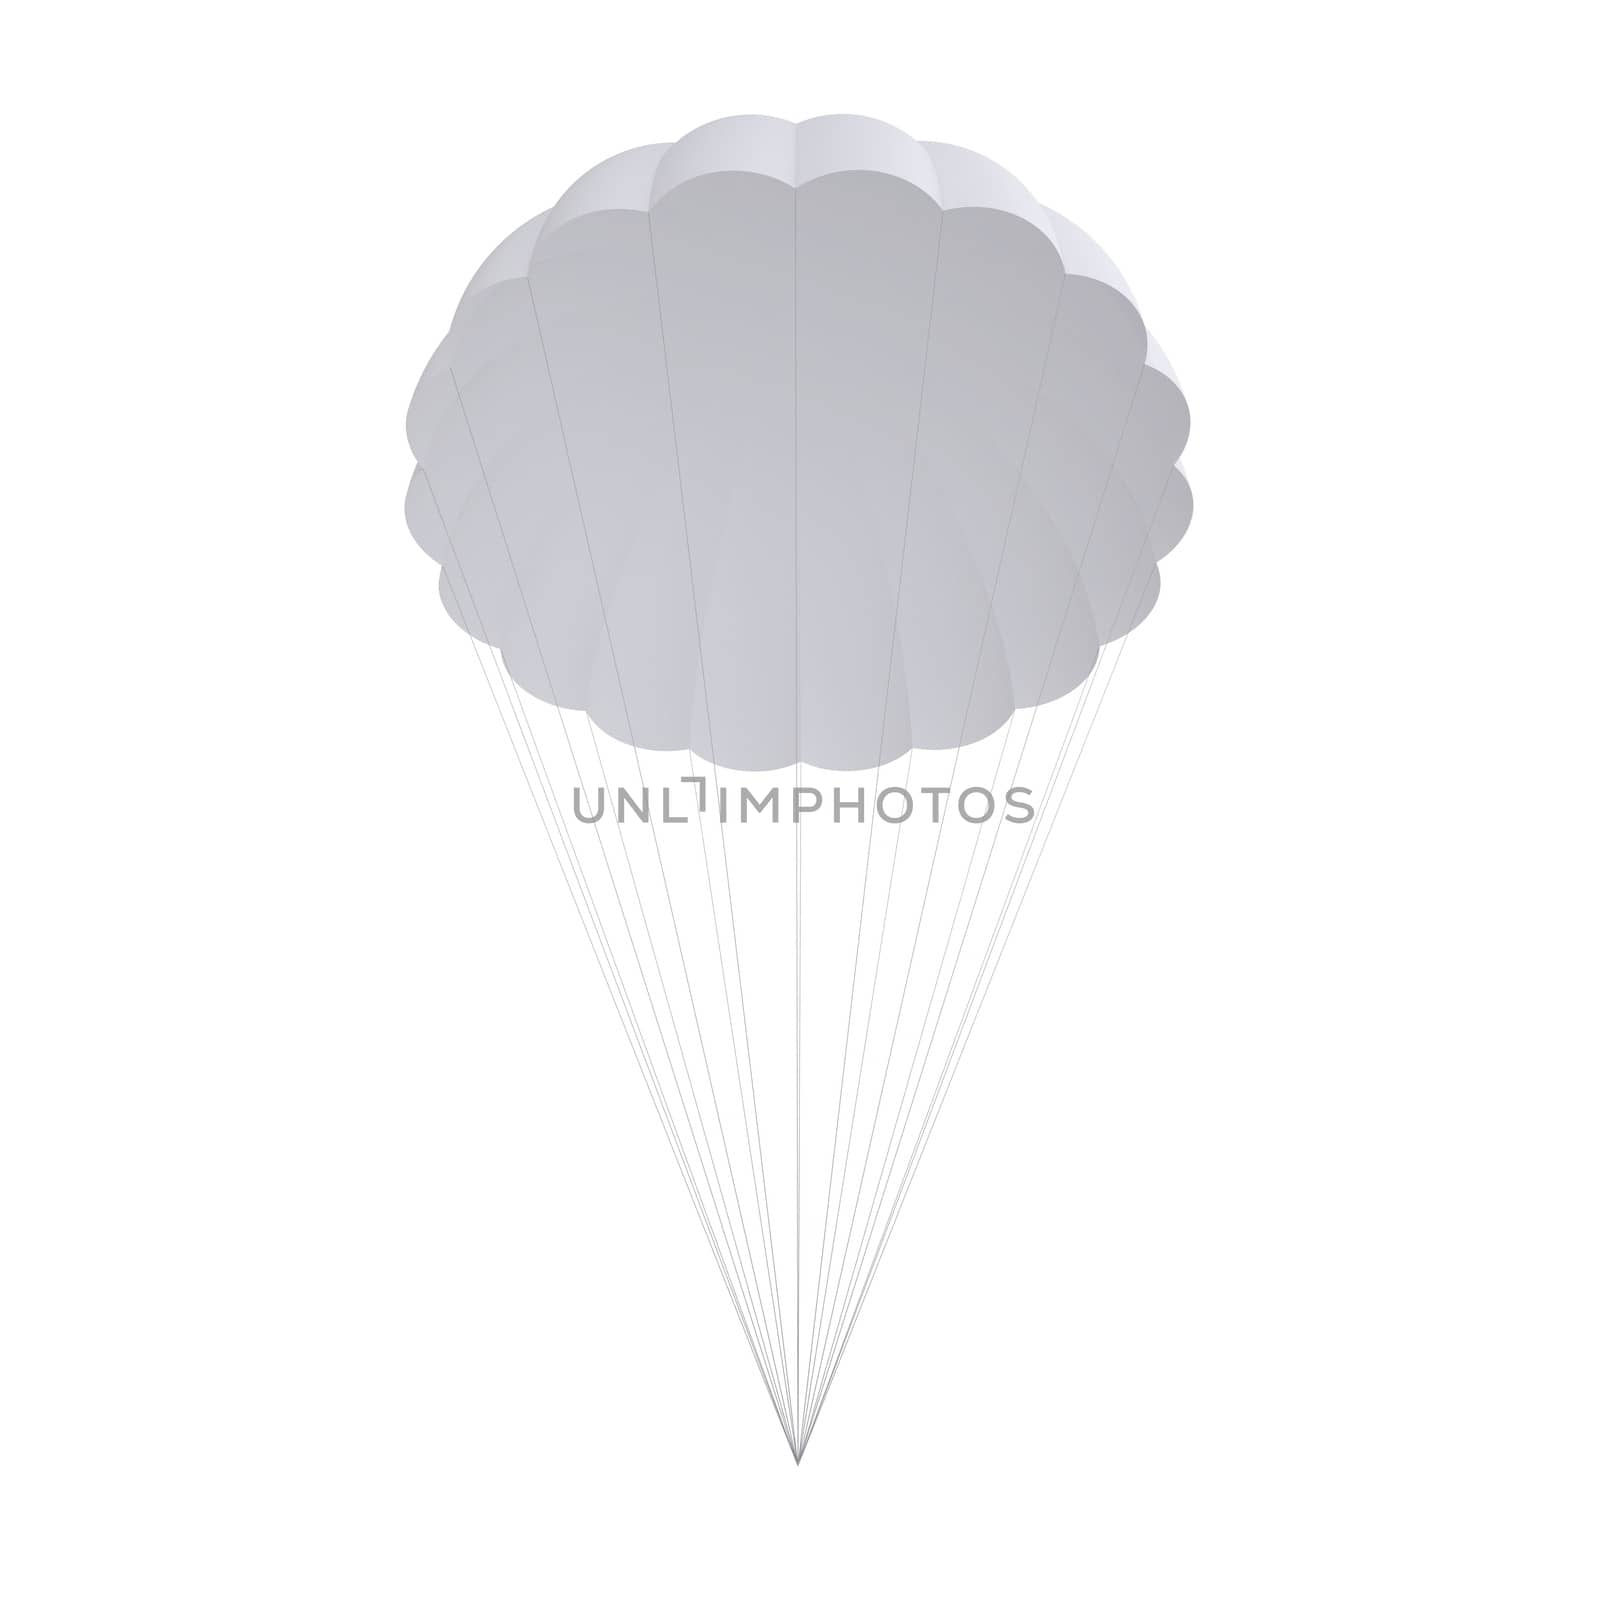 White parachute. Isolated render on a white background